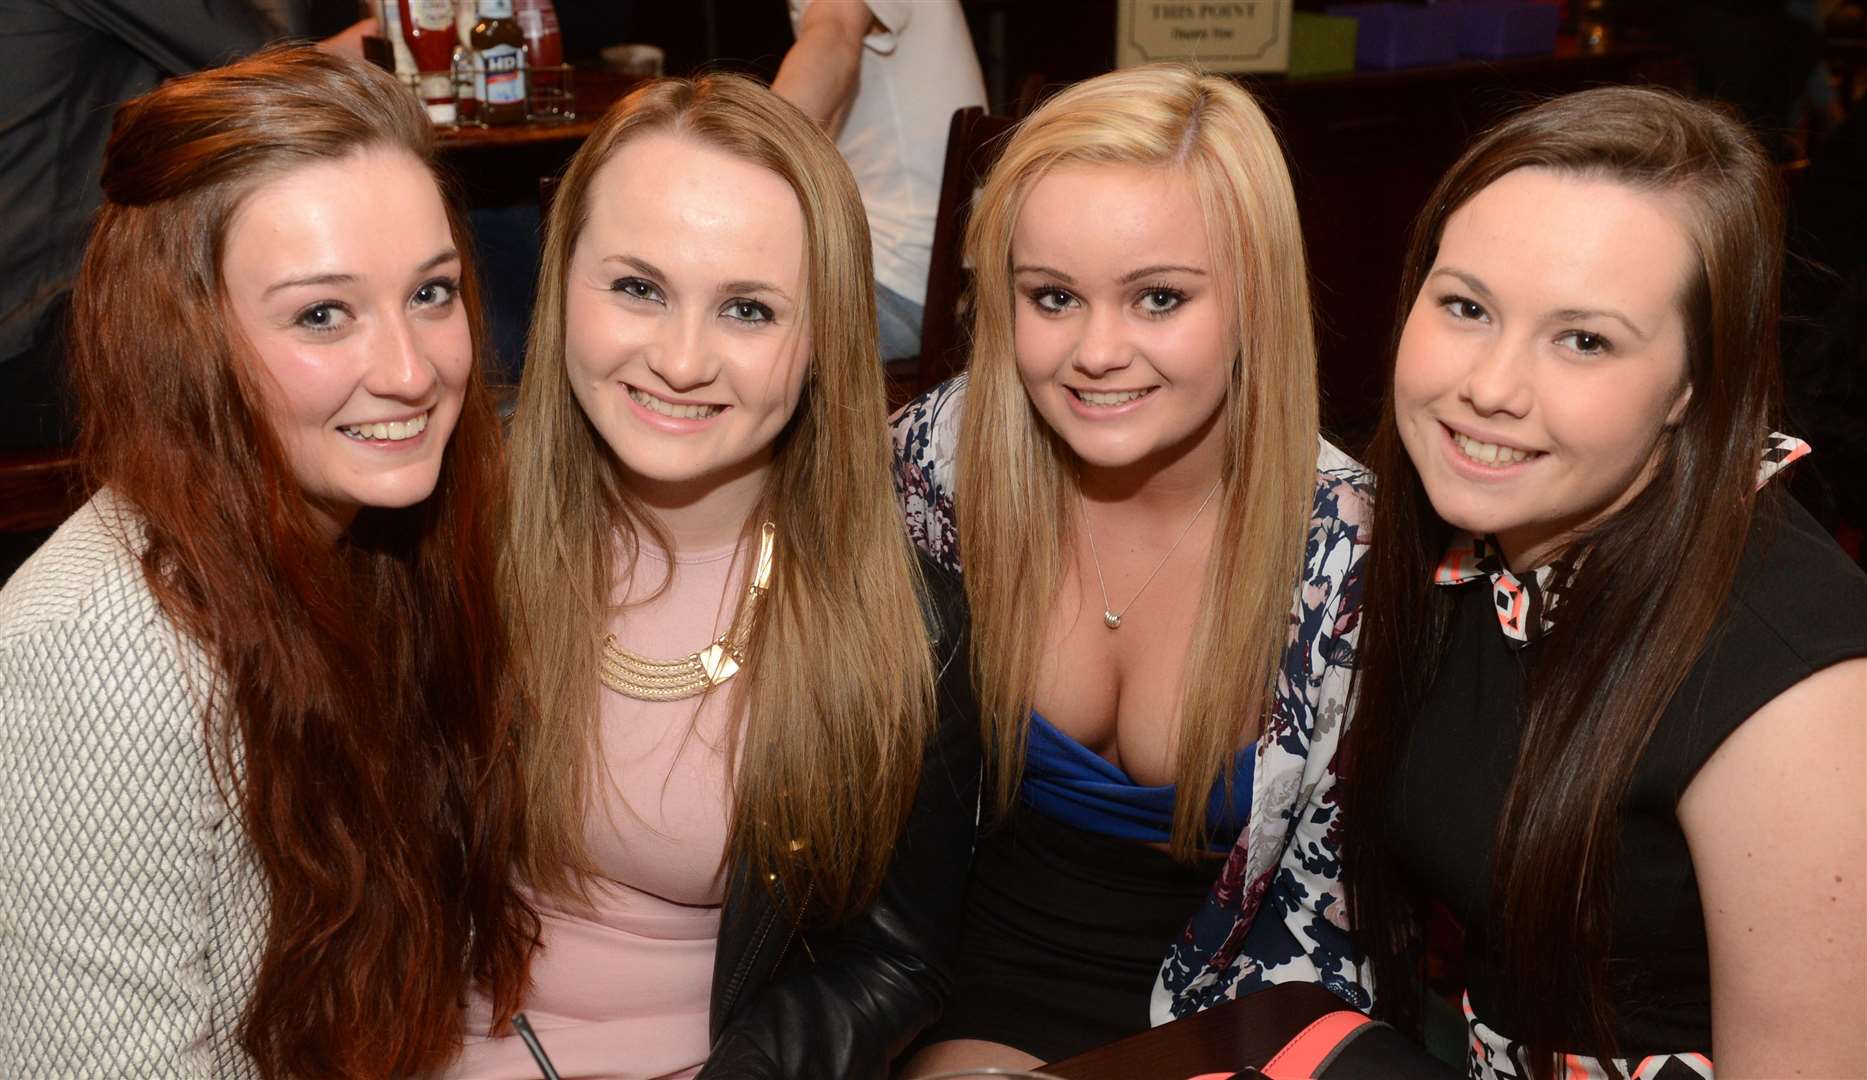 City Seen 2014-05-03..Catriona MacDougal, Kirsty Innes, Victoria Bain and Ellis Walton, friends from Lochardil having a girls night out in Wetherspoons..Pictures: Andrew Smith.Image No: 025548.